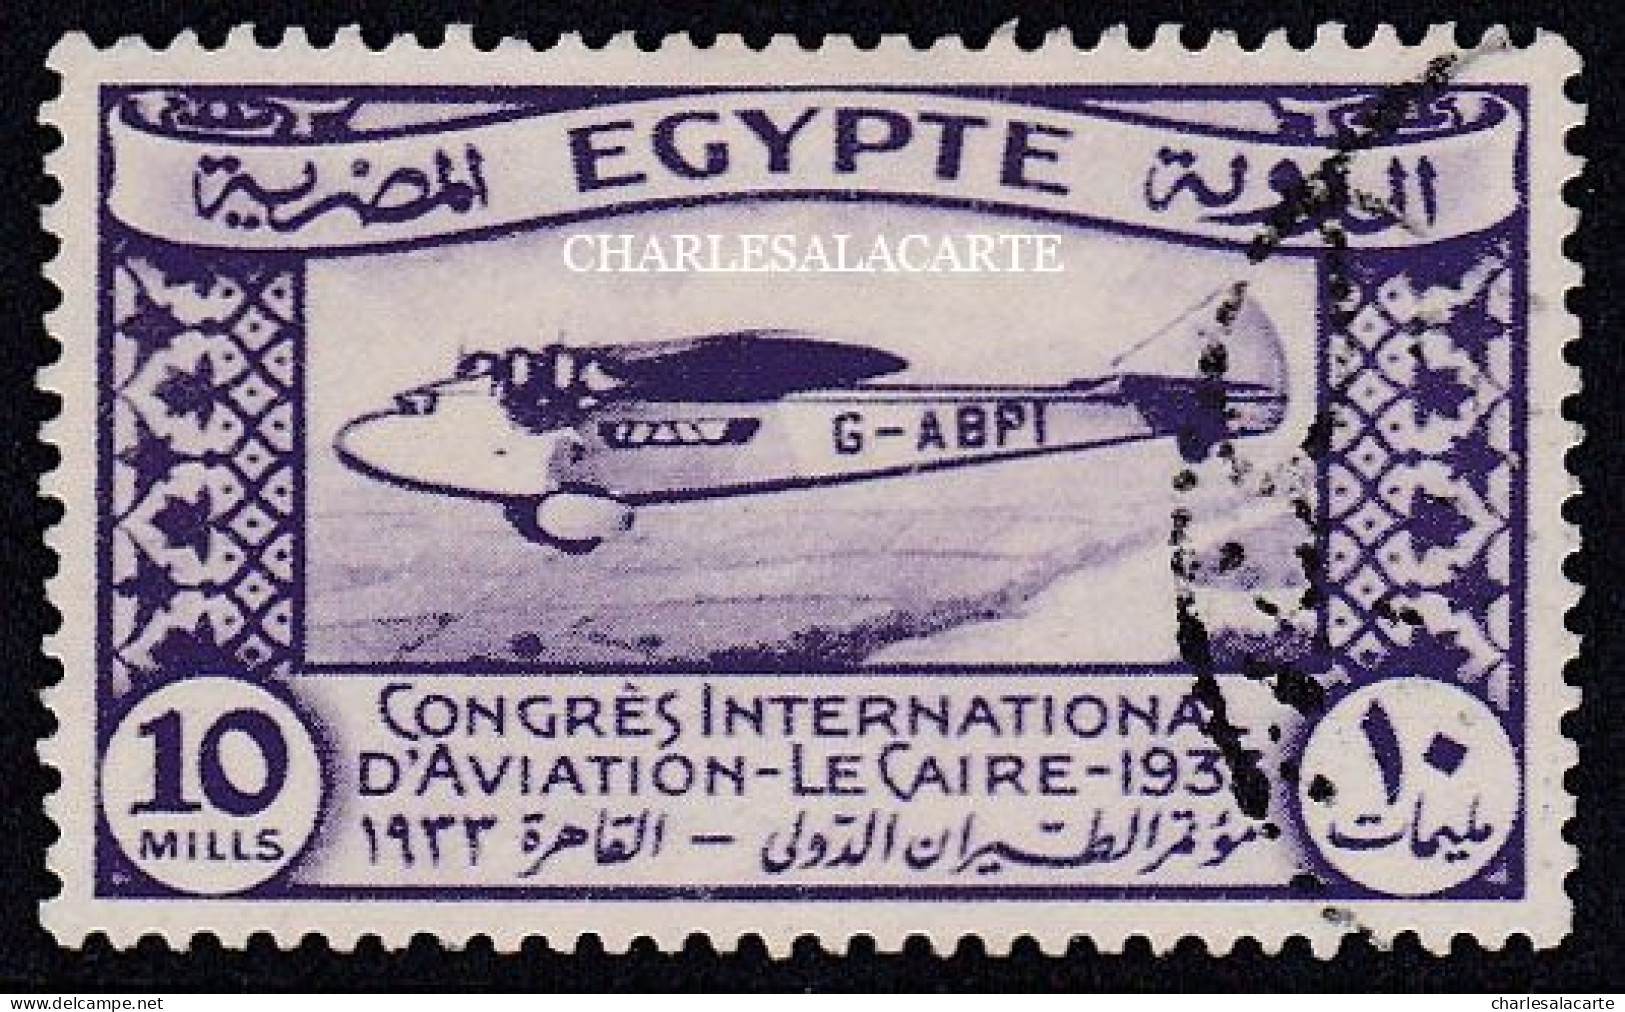 EGYPT  KINGDOM  1933  INTERNATIONAL AVIATION CONGRESS  10m. VIOLET   S.G. 215  VERY FINE USED - Used Stamps